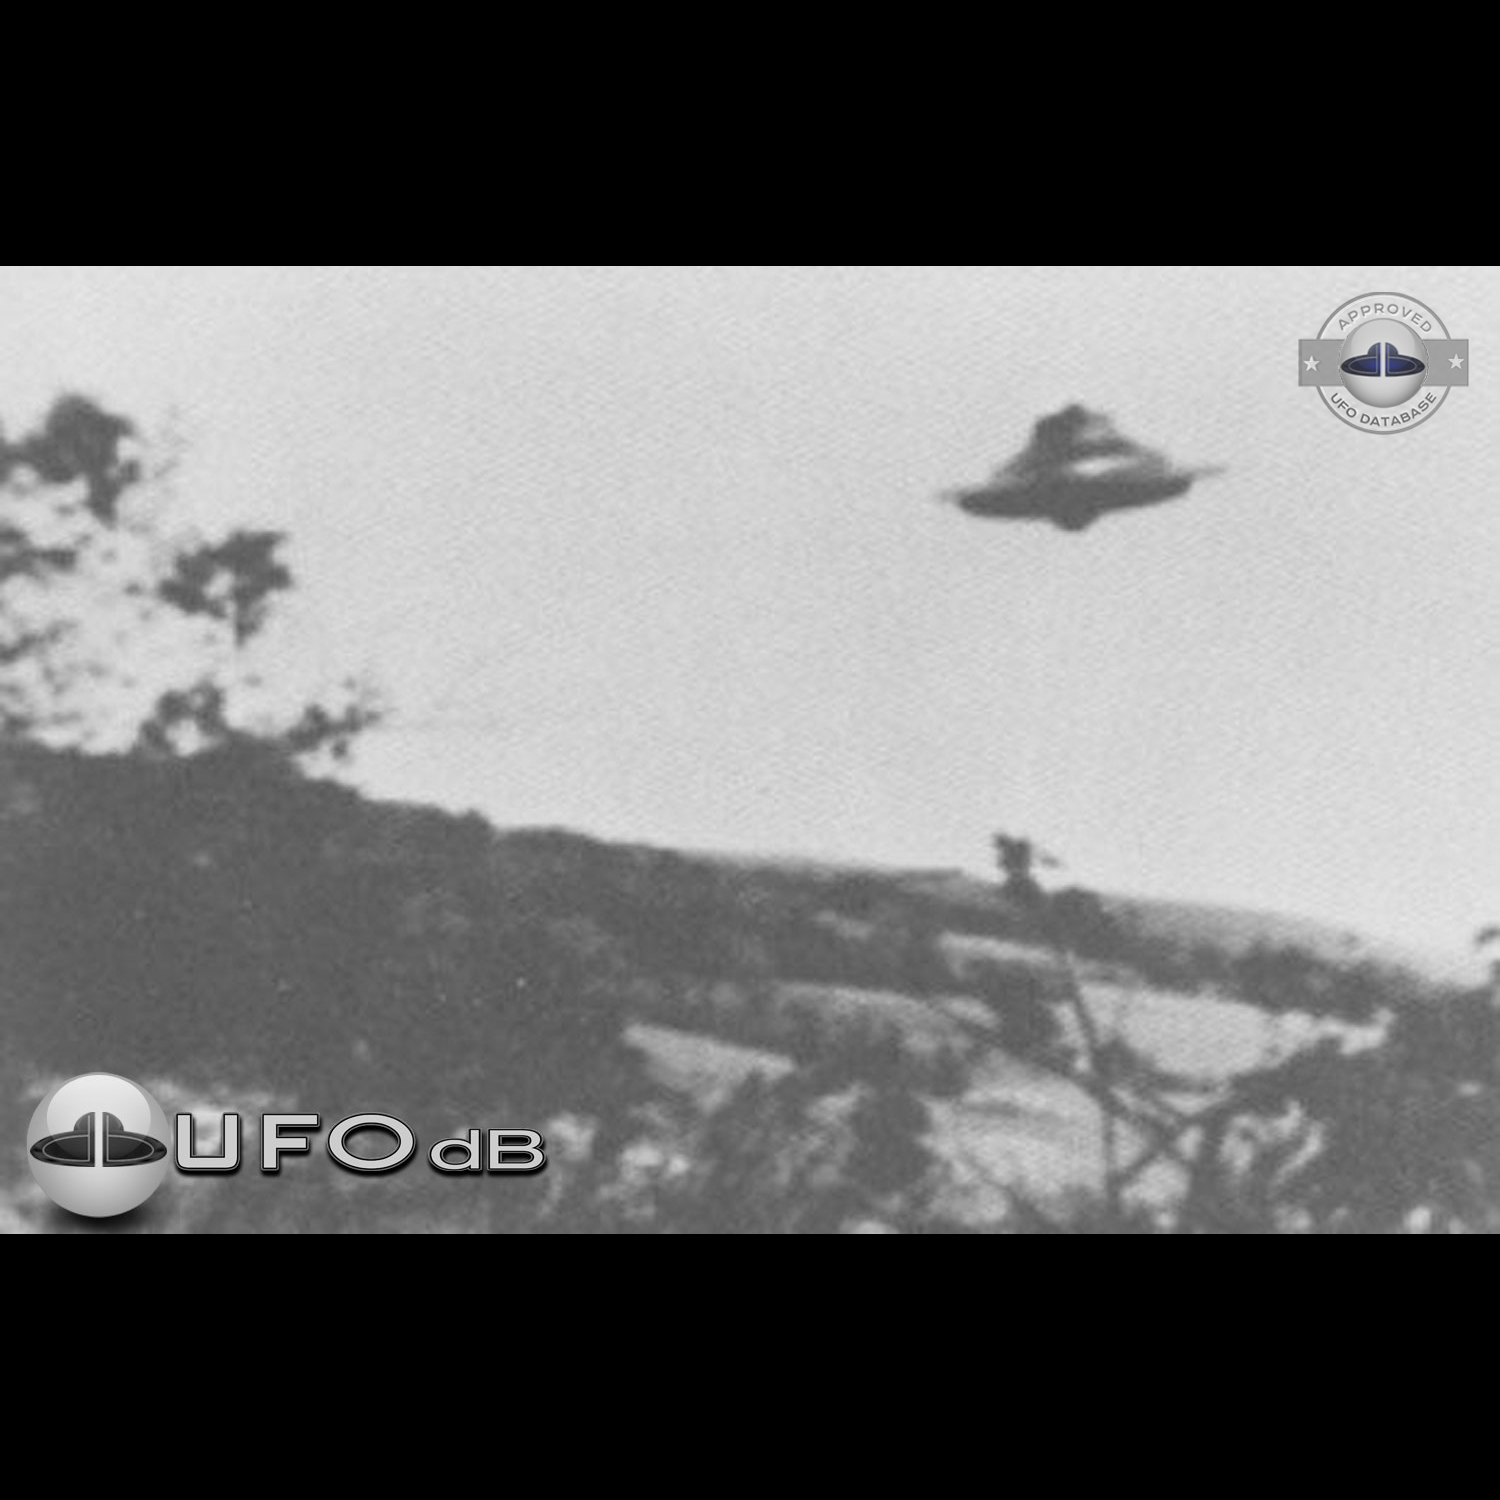 Metallic ufo approached the power lines from the West - Rhode Island UFO Picture #77-1